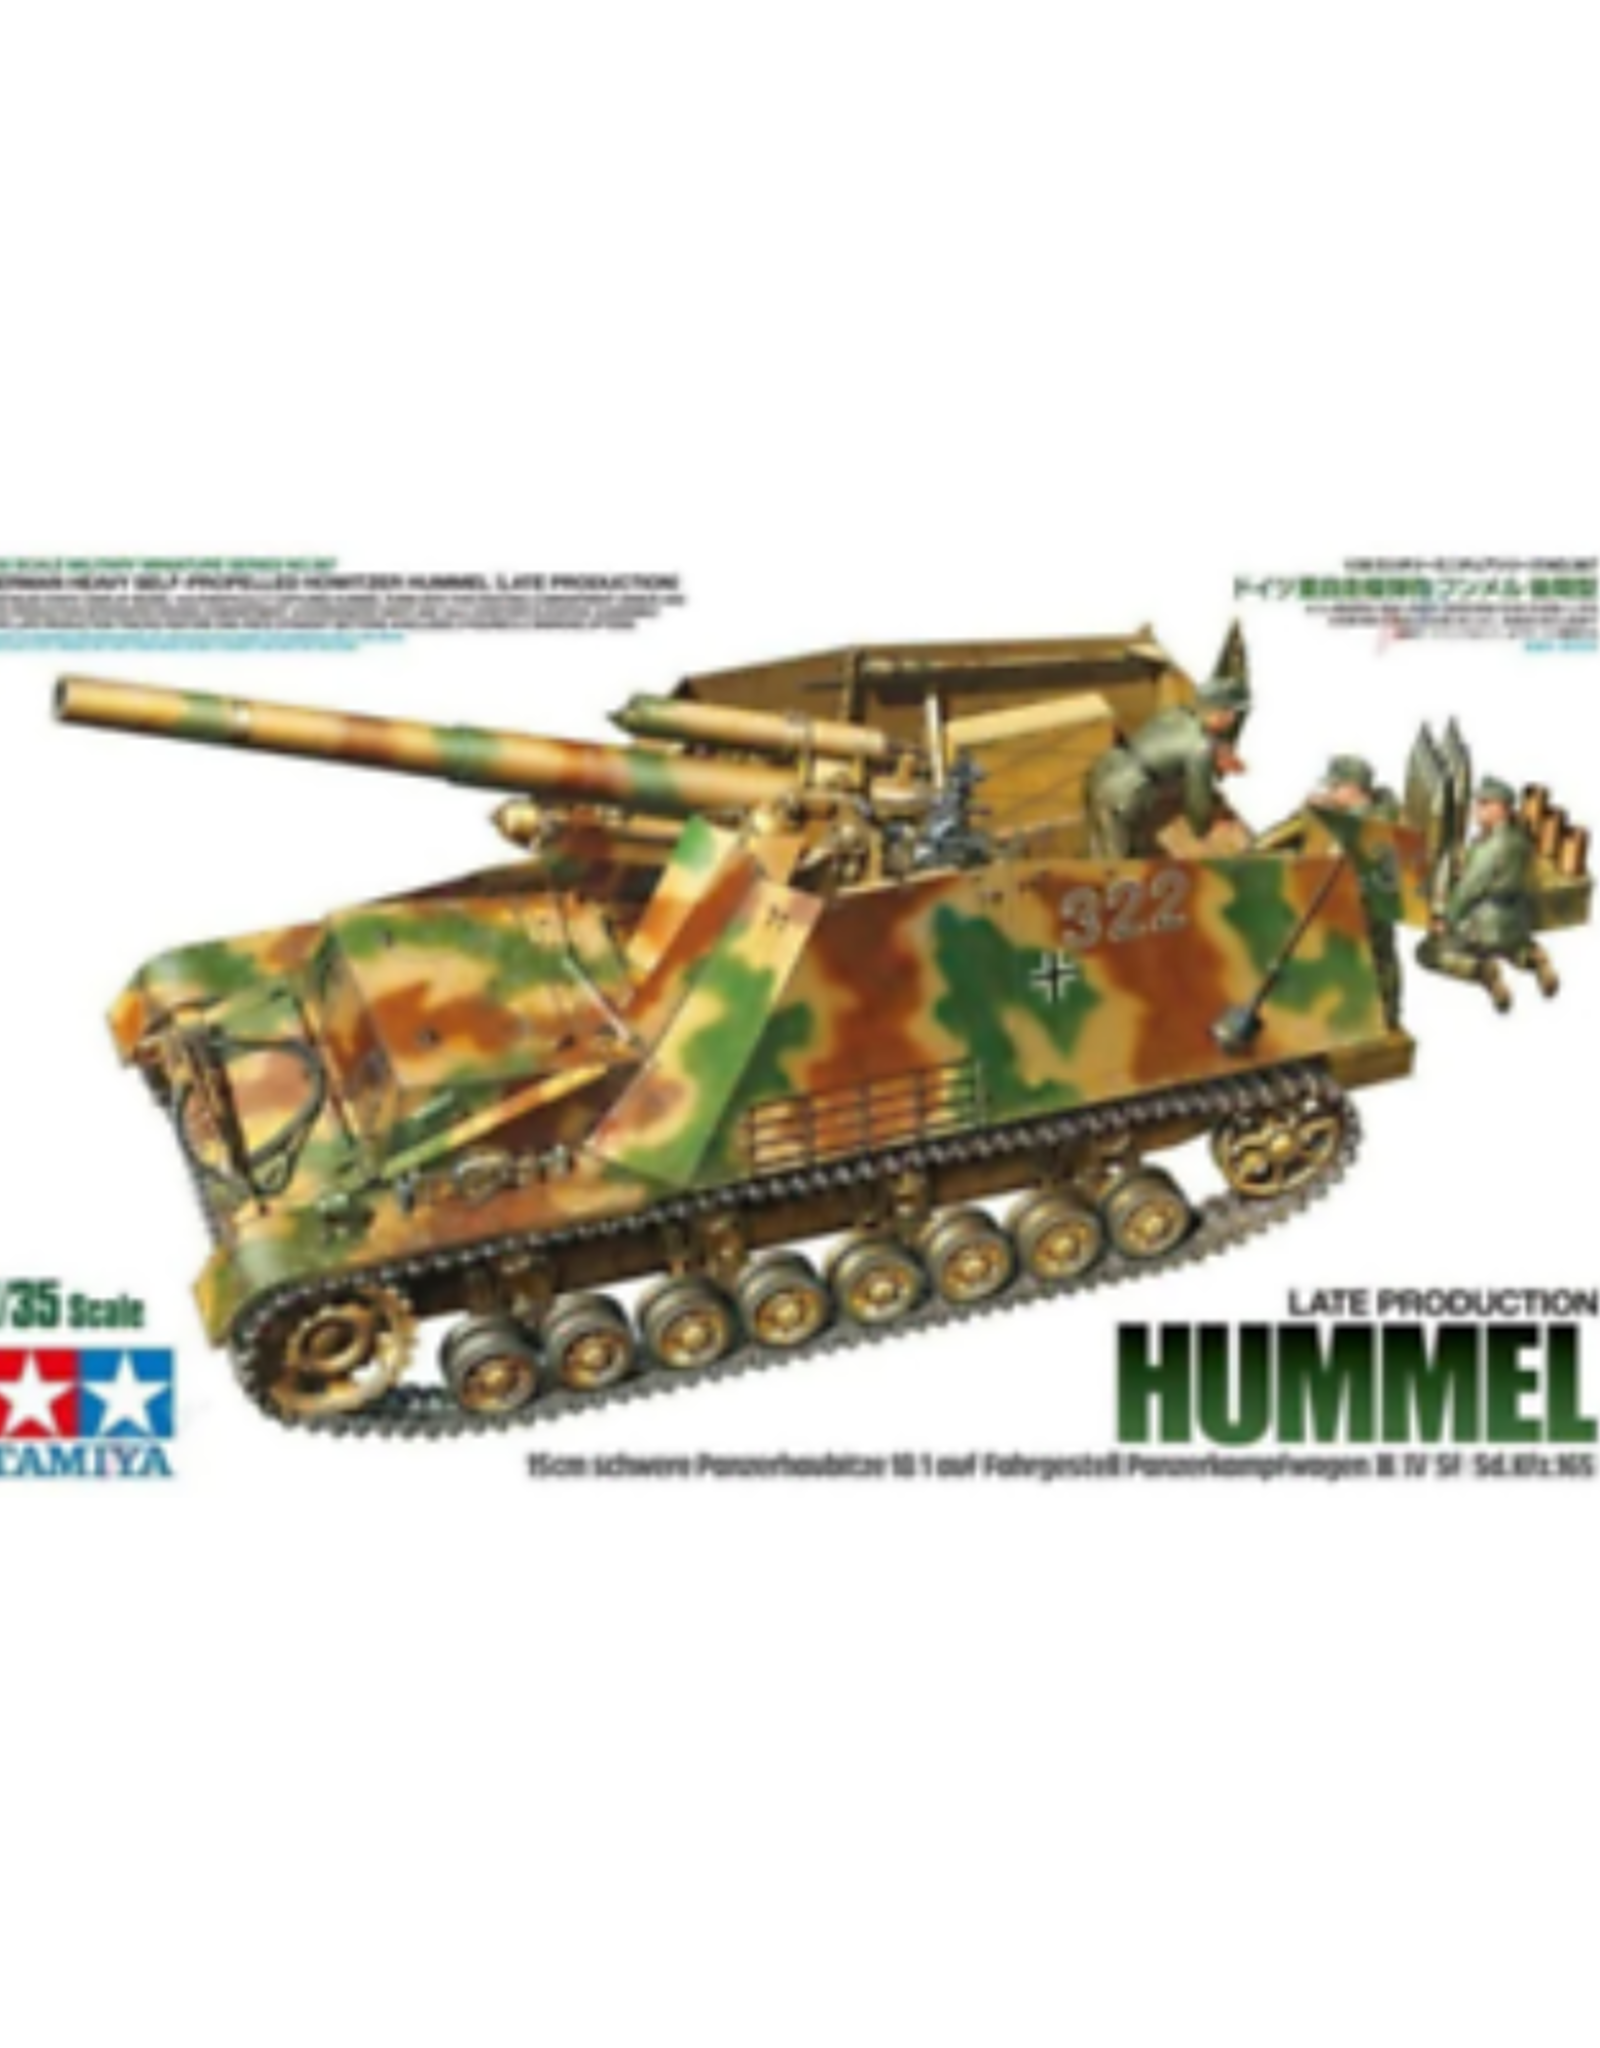 German Heavy Self-Propelled Howitzer Hummel (Late Production)